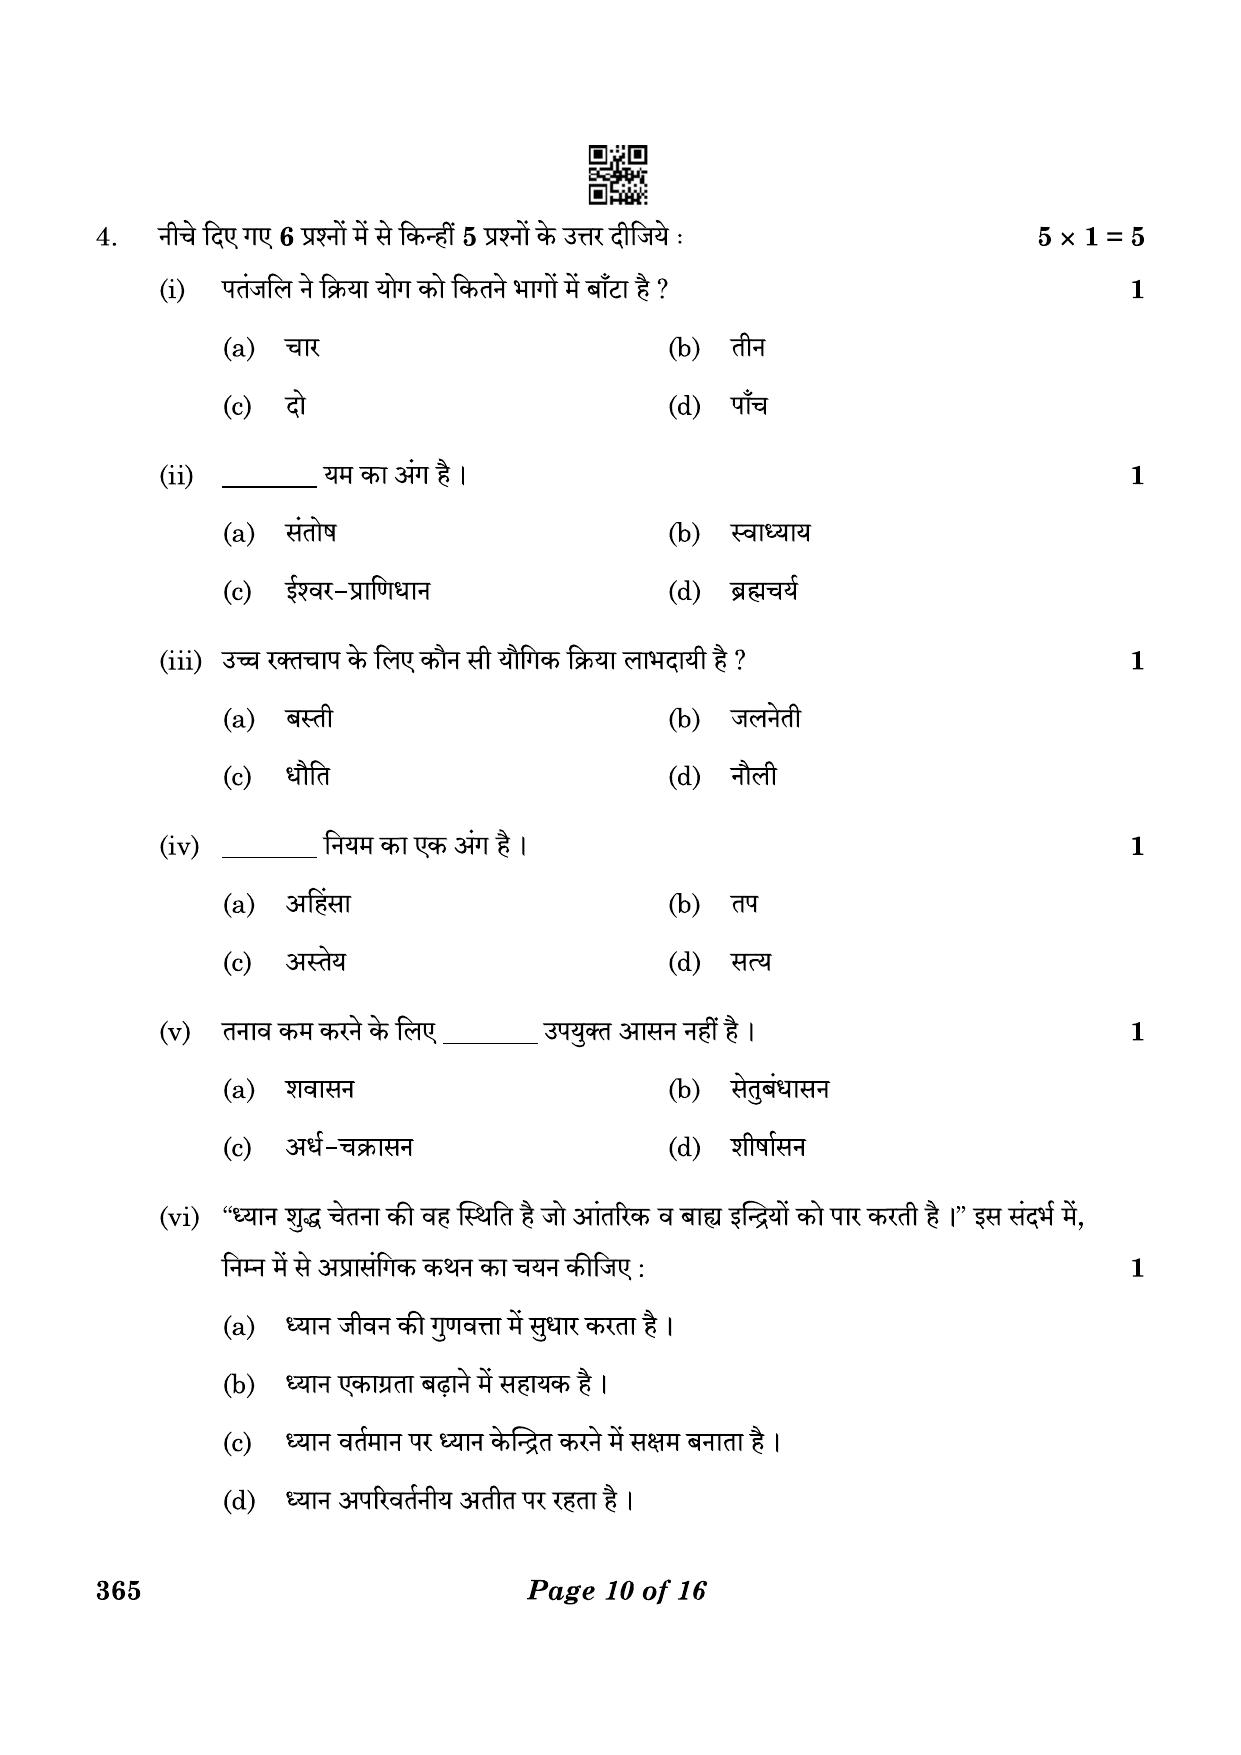 CBSE Class 12 365_Yoga 2023 Question Paper - Page 10